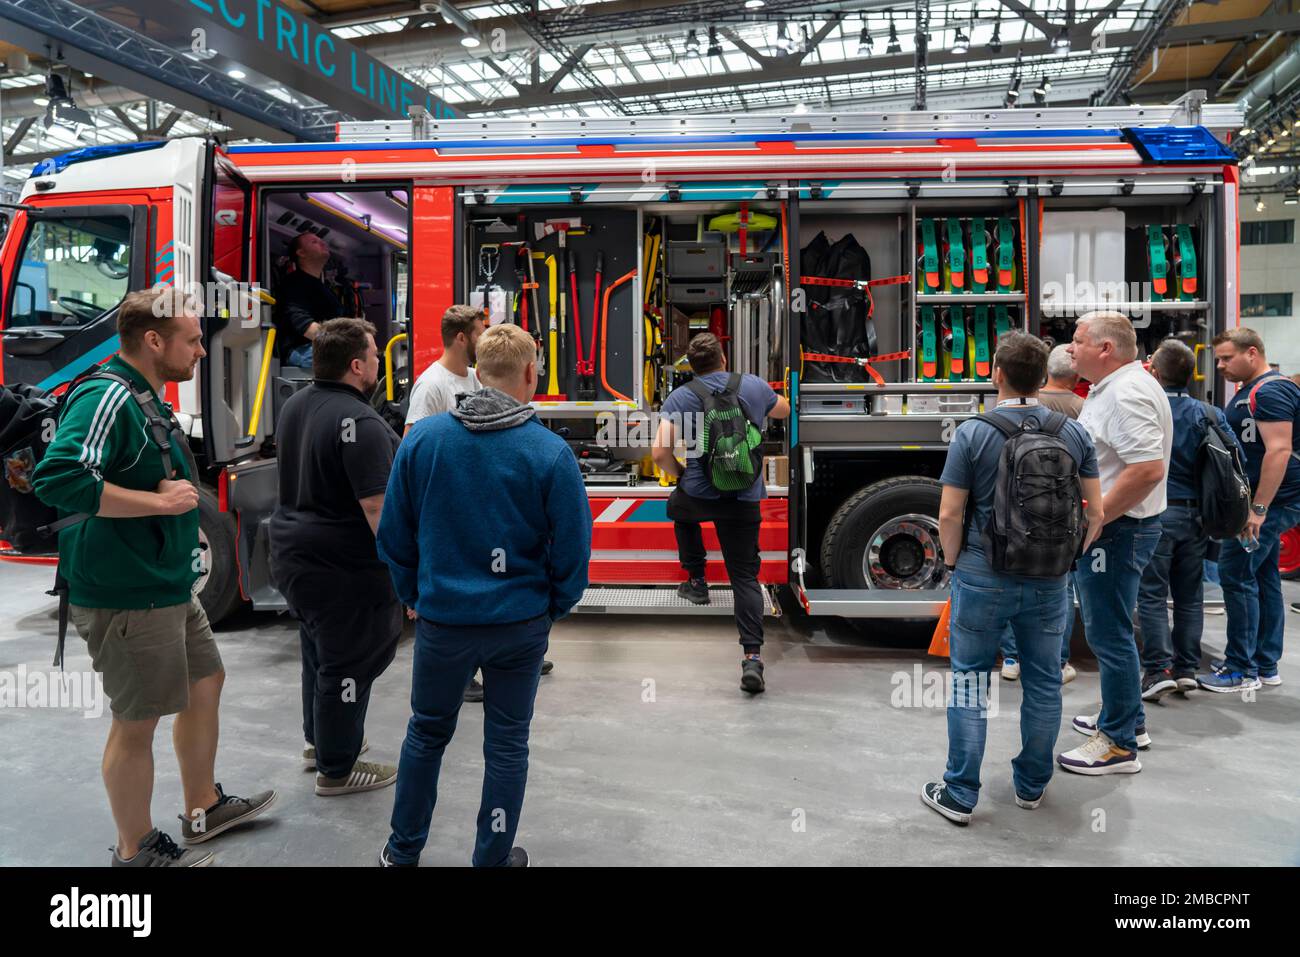 Emergency vehicles, Interschutz 2022 trade fair in Hanover, the world's largest trade fair for fire brigade, rescue service, disaster control technolo Stock Photo